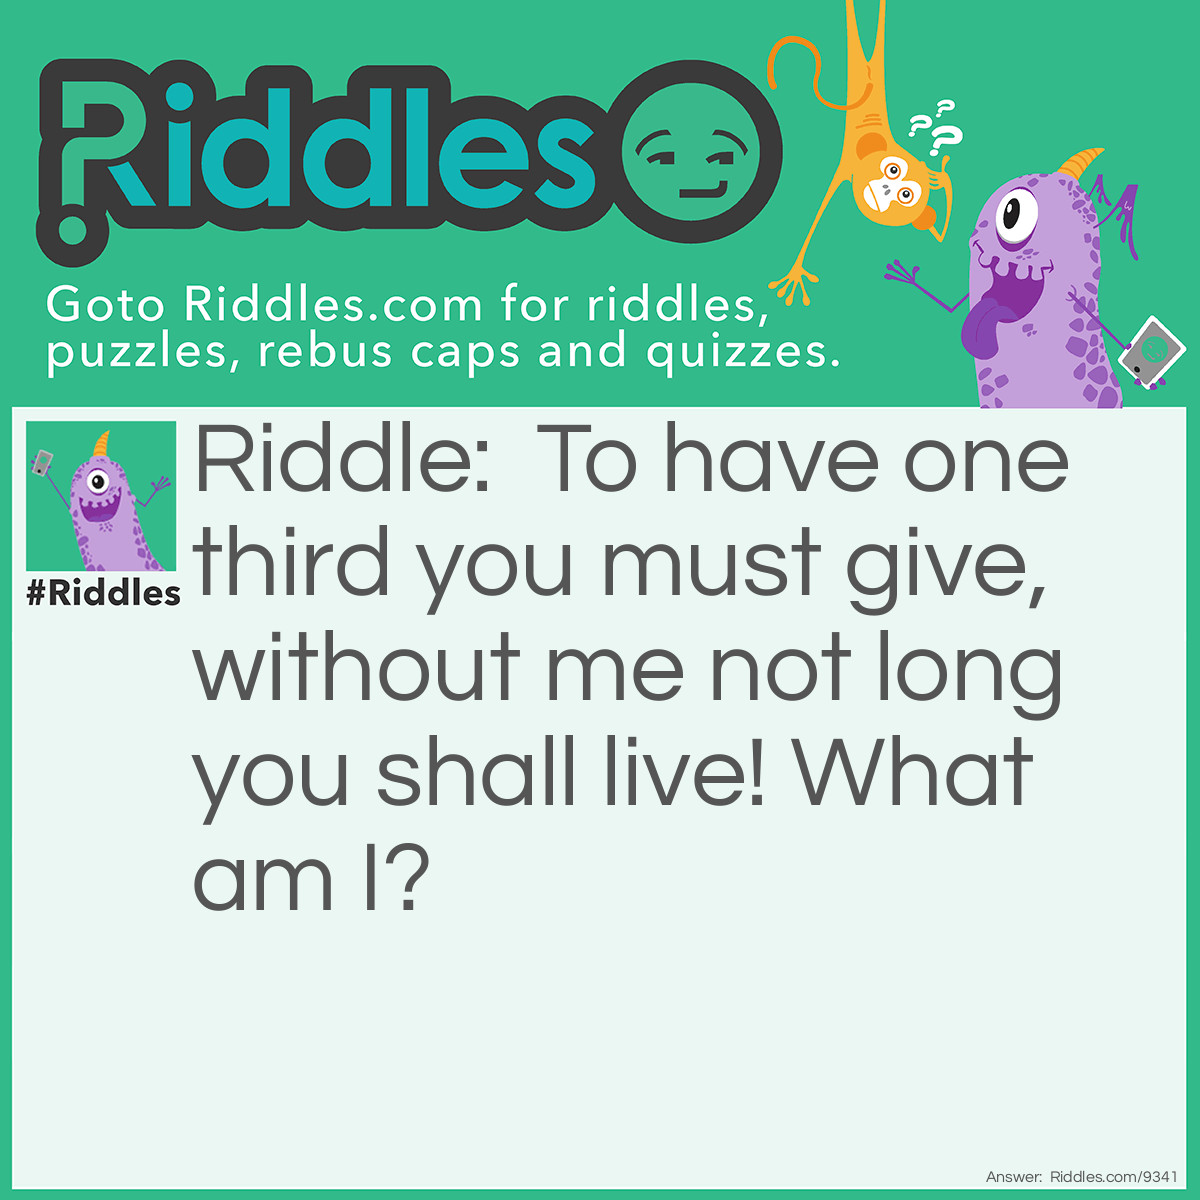 Riddle: To have one third you must give, without me not long you shall live! What am I? Answer: Sleep.